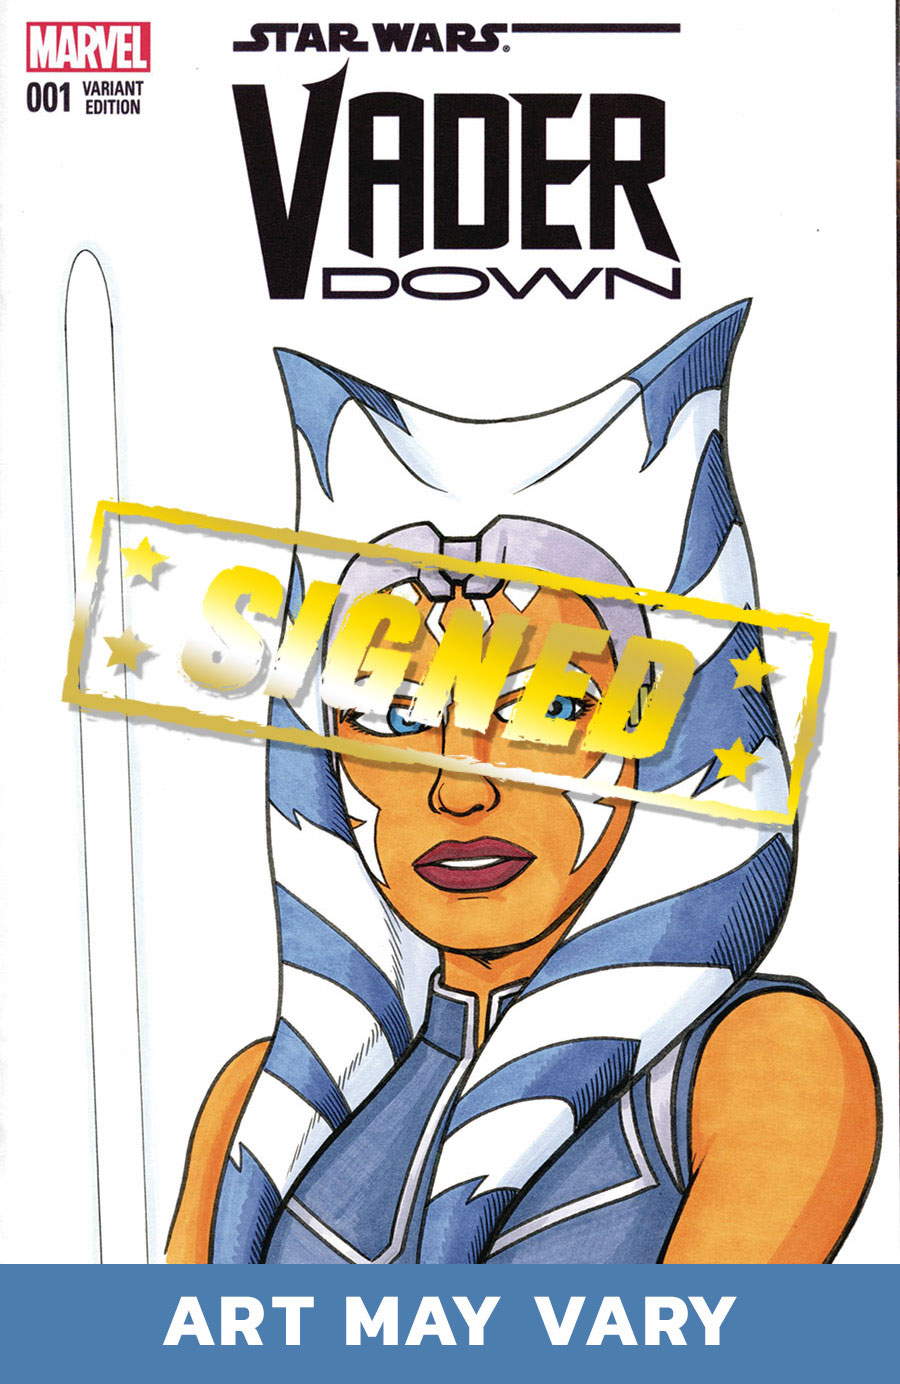 Marvel Comics Commissioned Cover Art Signed & Remarked By Brendon Fraim & Brian Fraim With An Ahsoka Tano Hand-Drawn Sketch